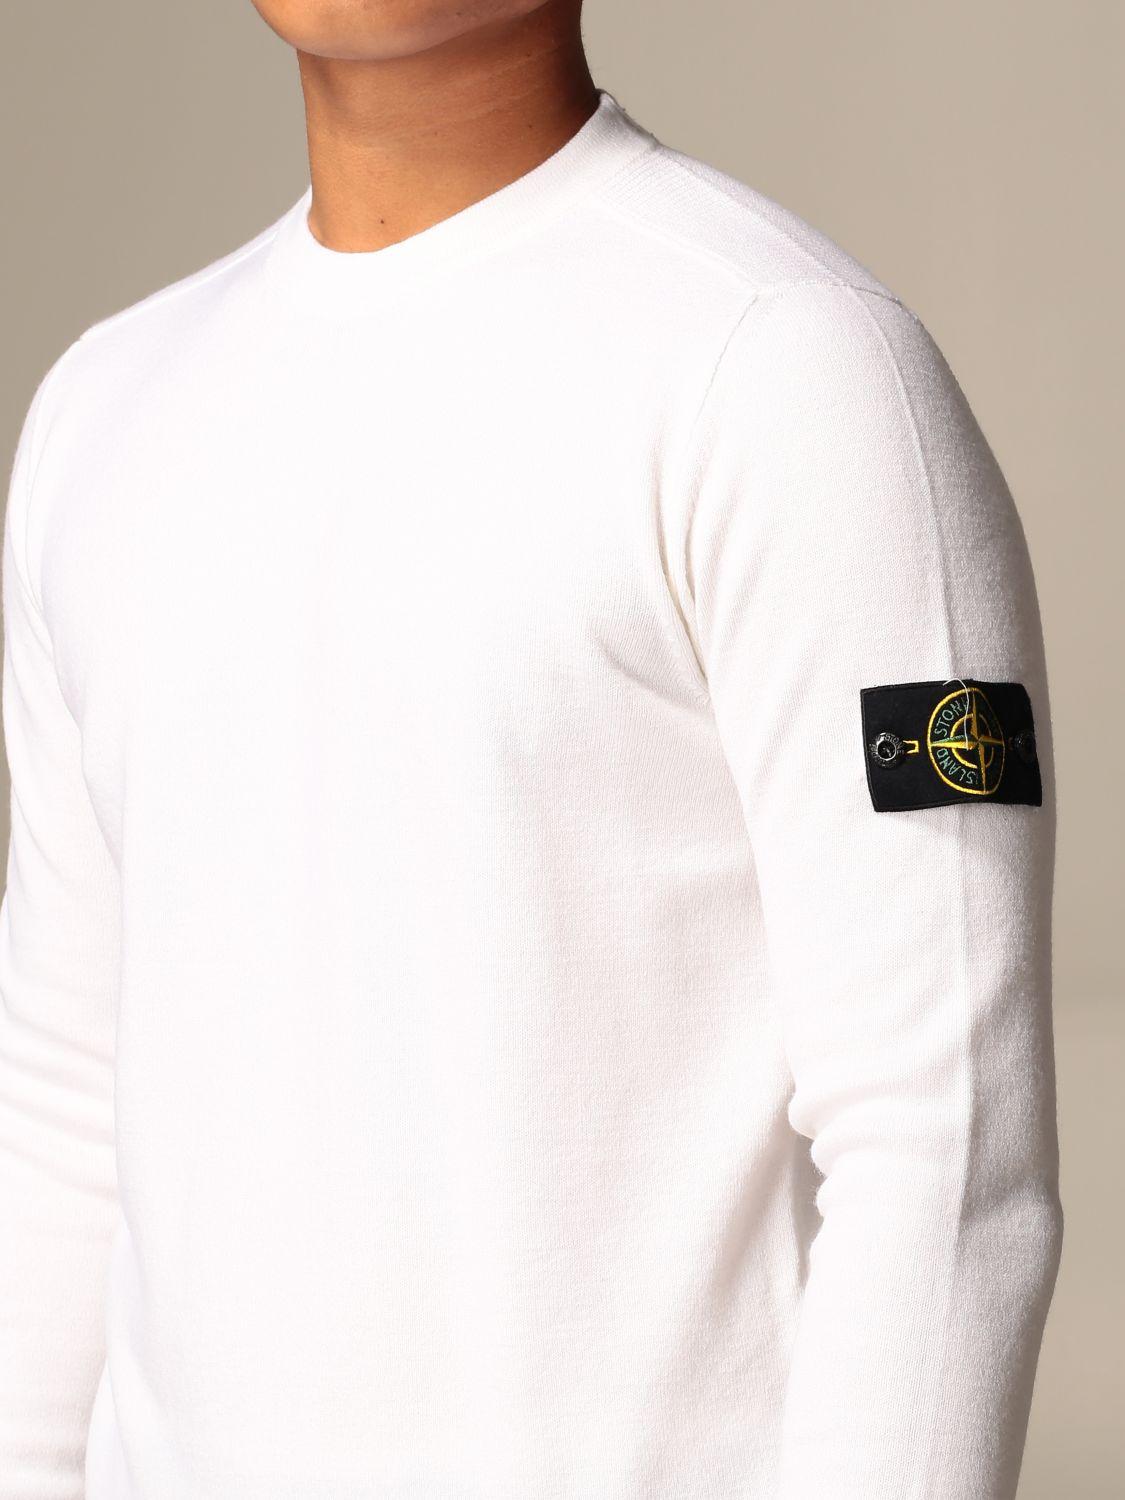 Stone Island Sweater in White for Men - Lyst